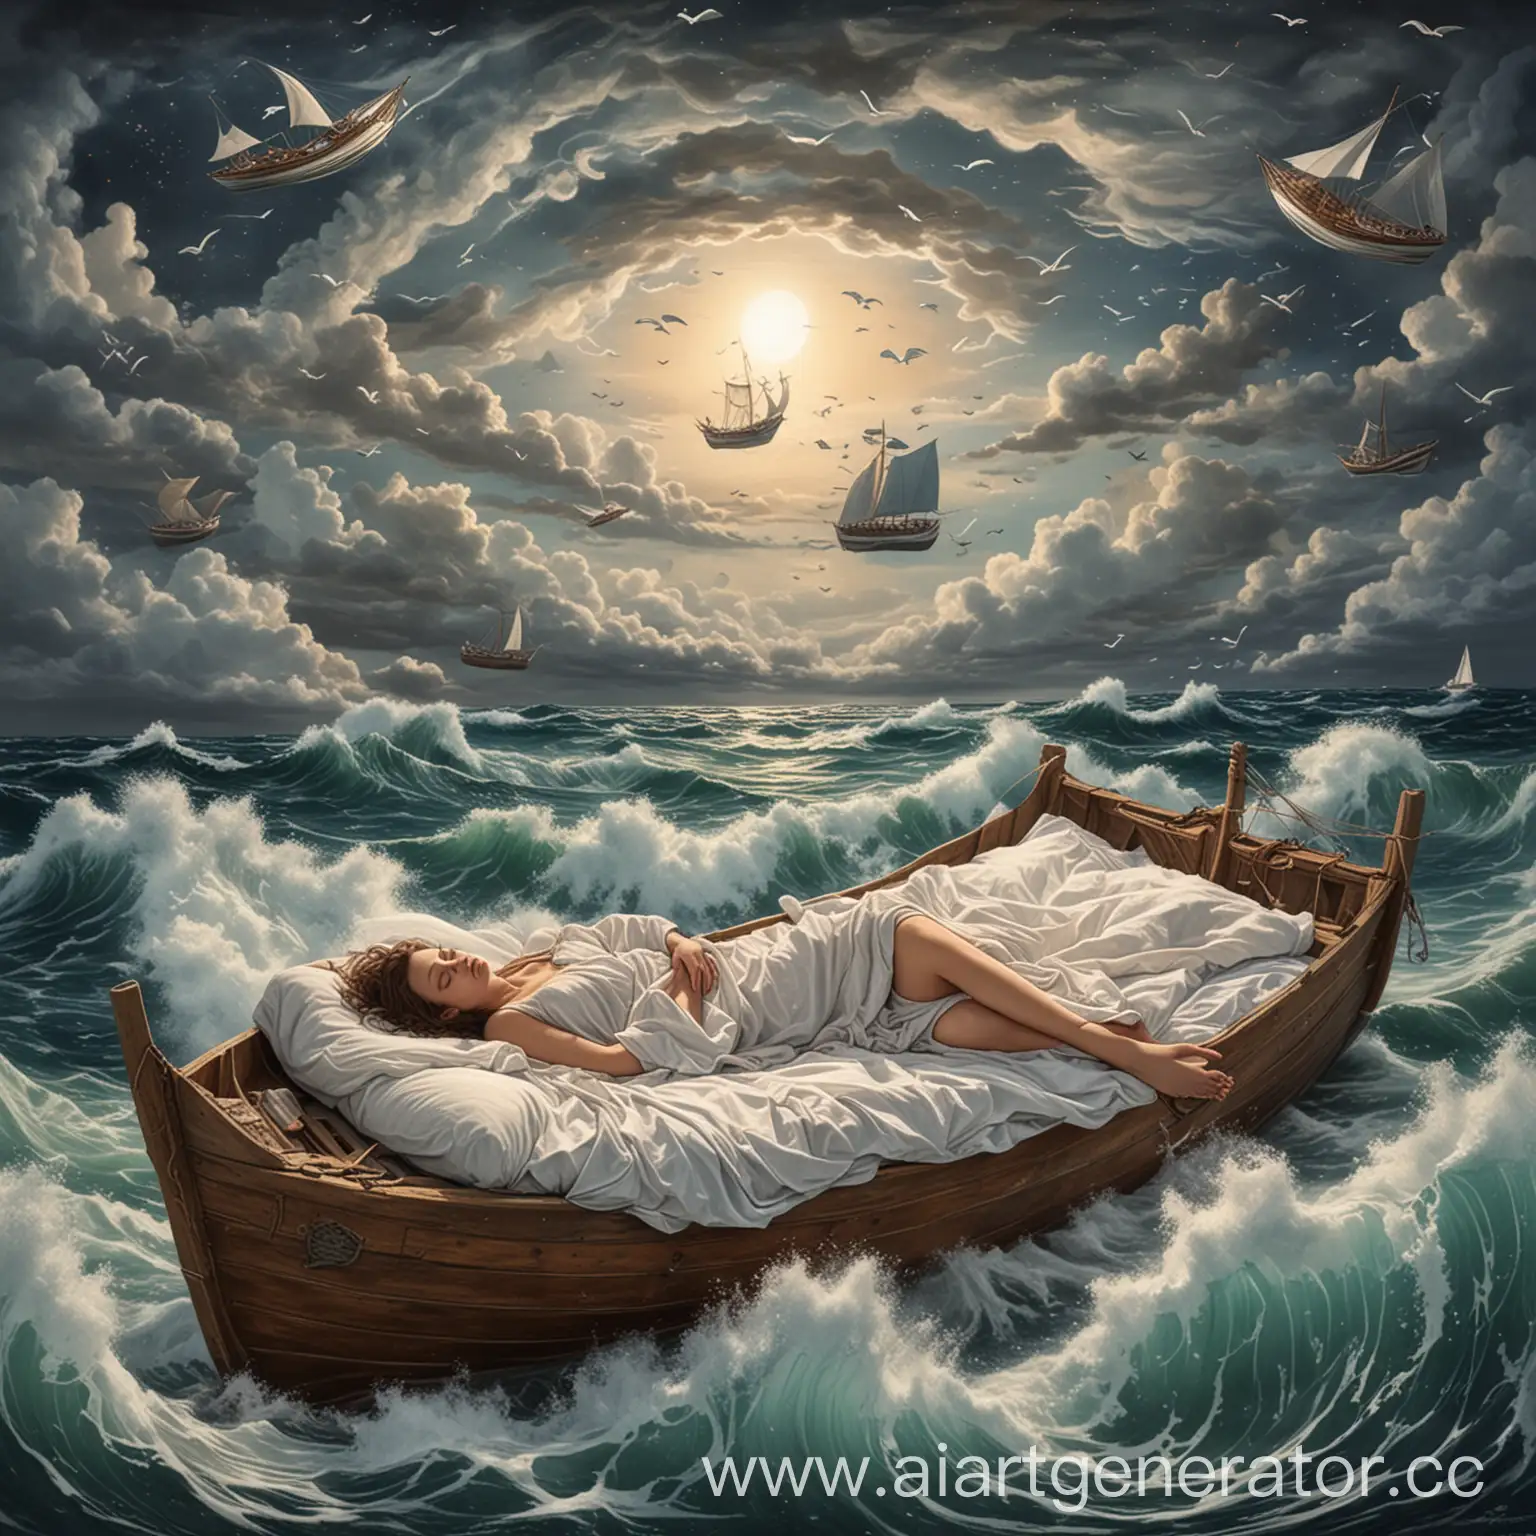 Draw me a  sleeping woman. the woman is in her bed and the bed is floating in the sky. She is dreaming about waves and boats the waves and boats on them are around the woman